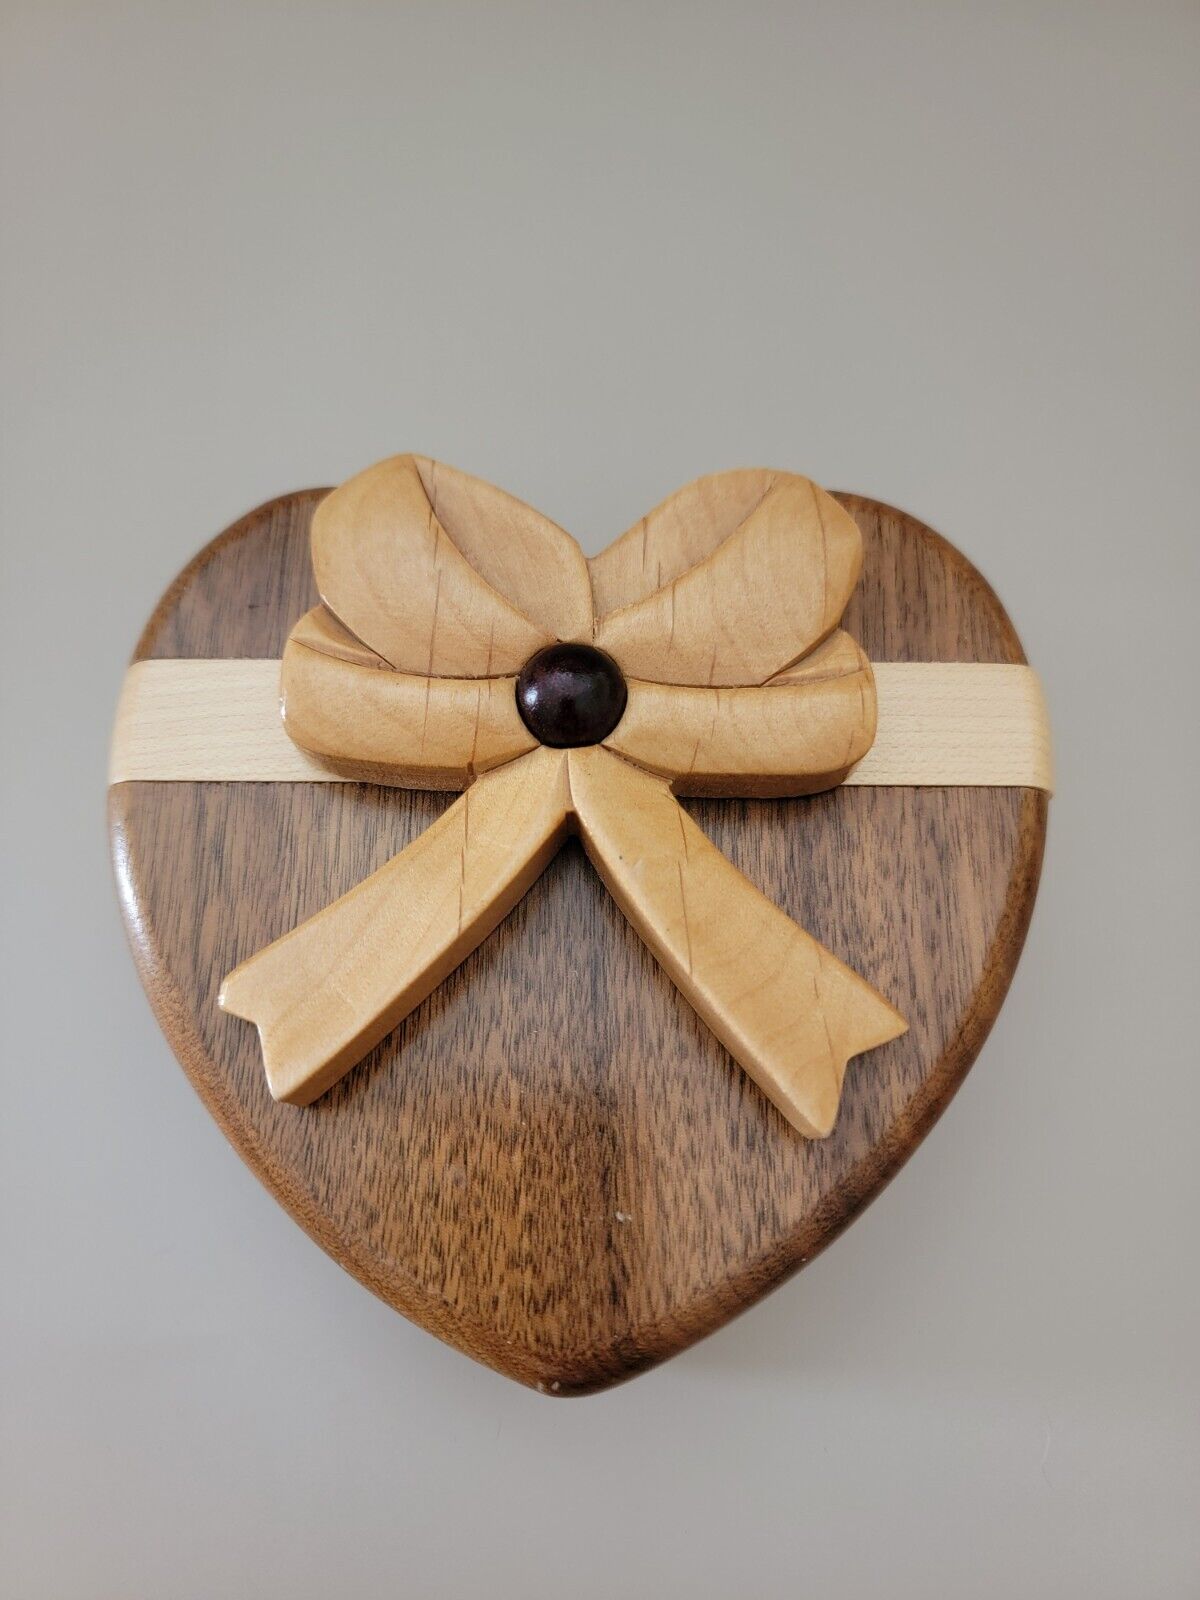 Folk Art Wood Heart with Bow Puzzle, Stash Box,  Jewelry Holder 